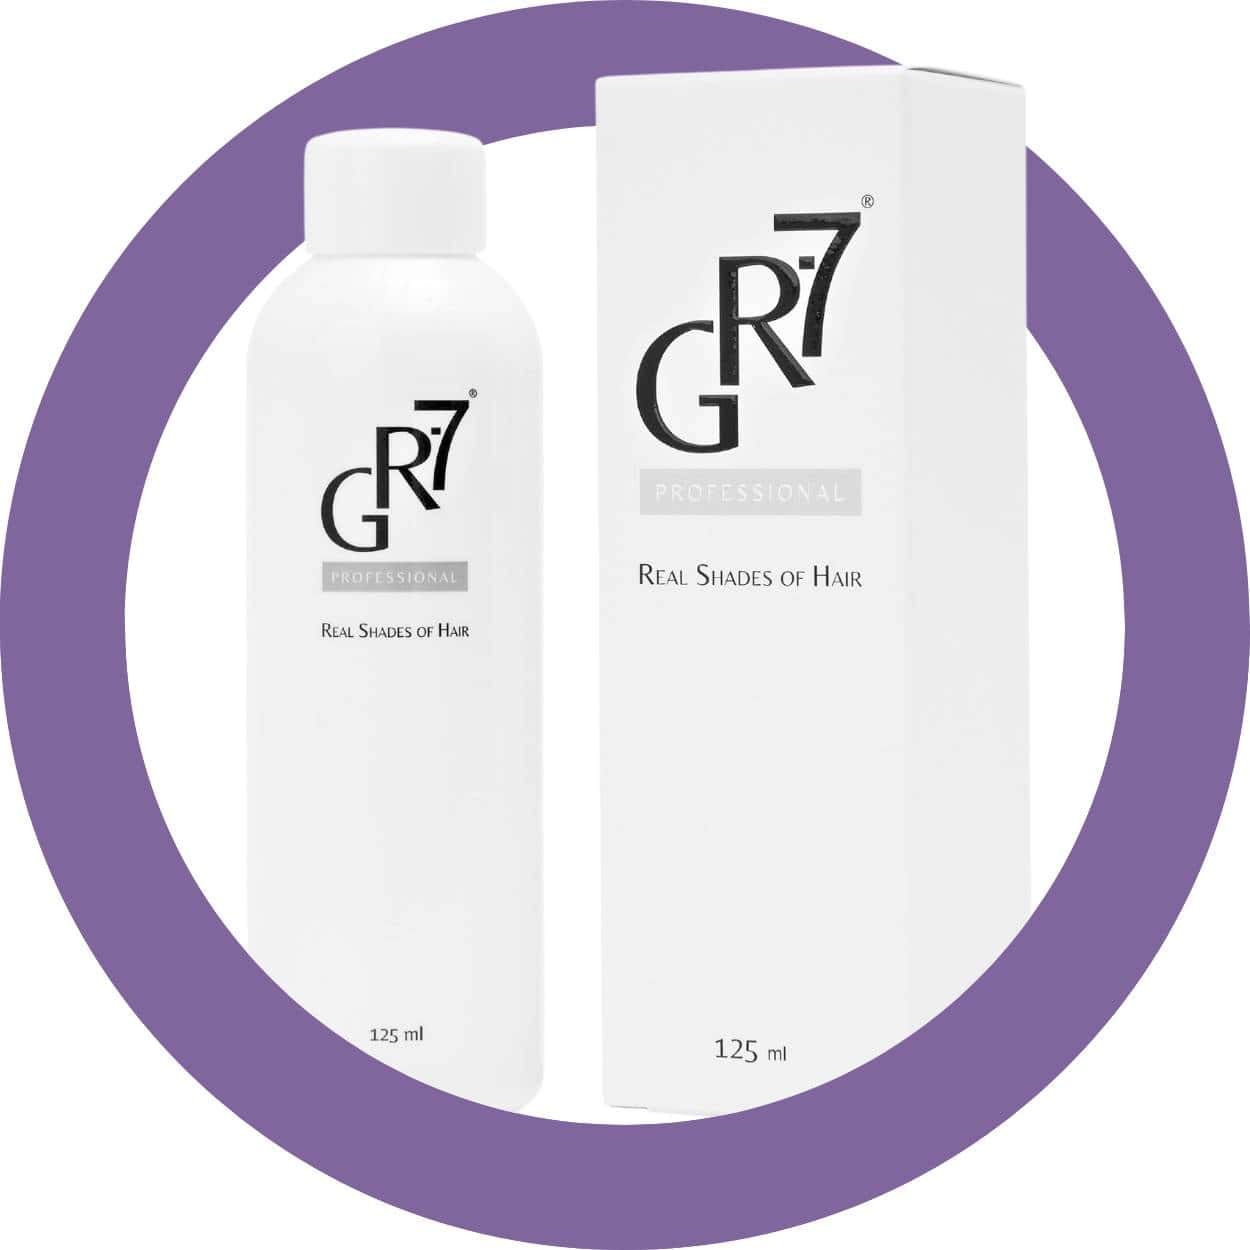 1 Best Anti-Grey Hair Treatment in the UK | GR-7 Professional I think this  better describes this page.